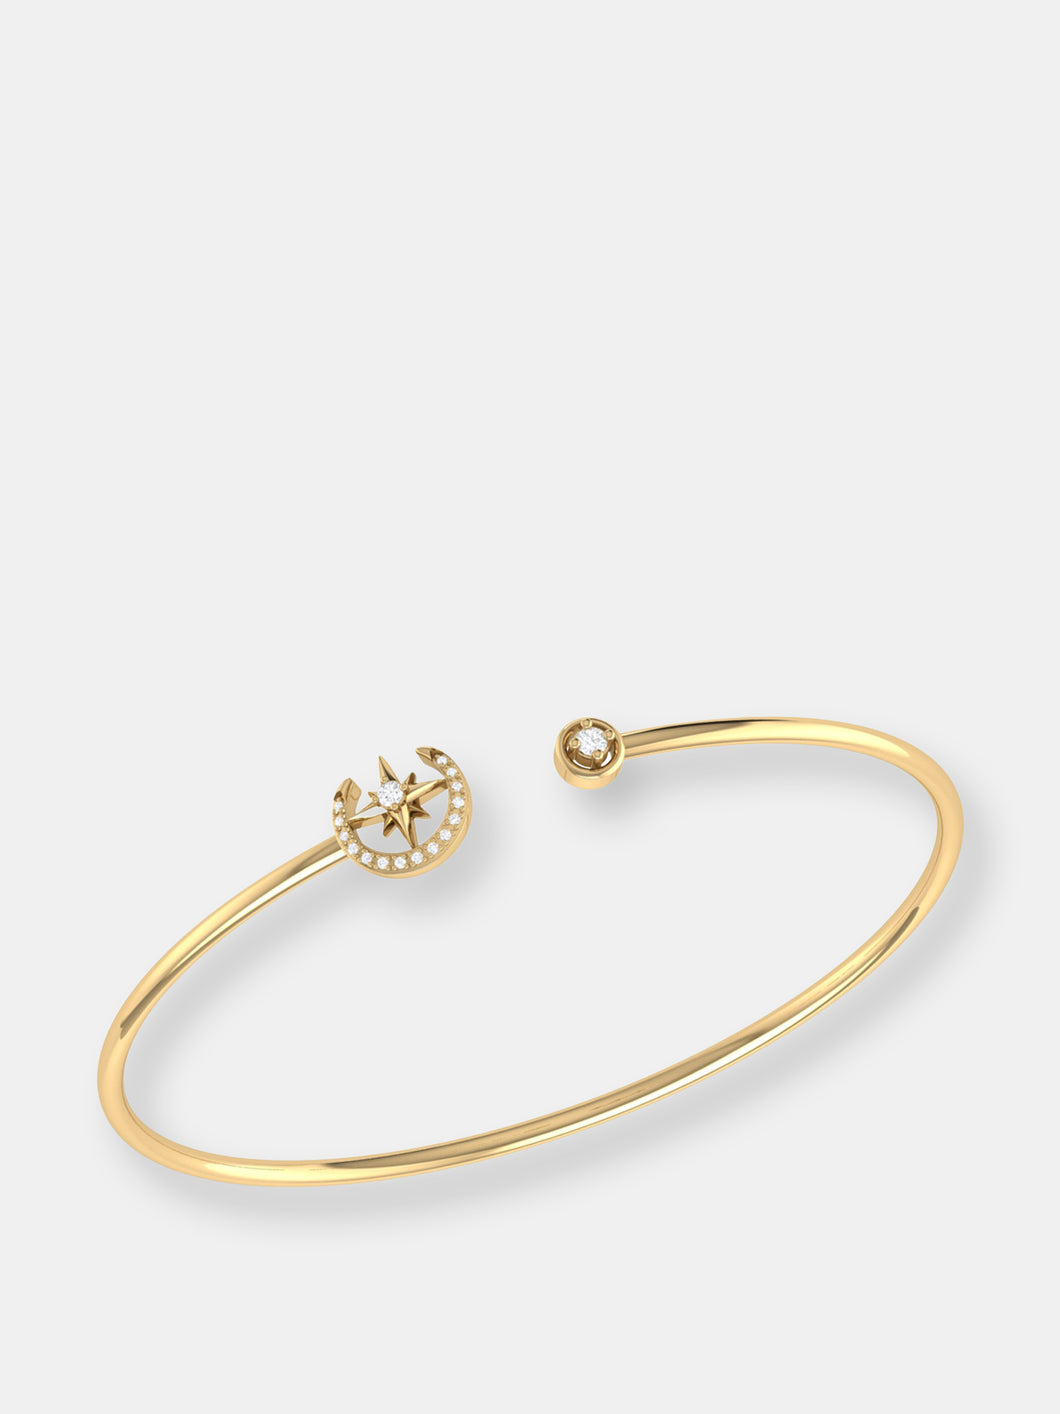 North Star Crescent Adjustable Diamond Cuff In 14K Yellow Gold Vermeil On Sterling Silver